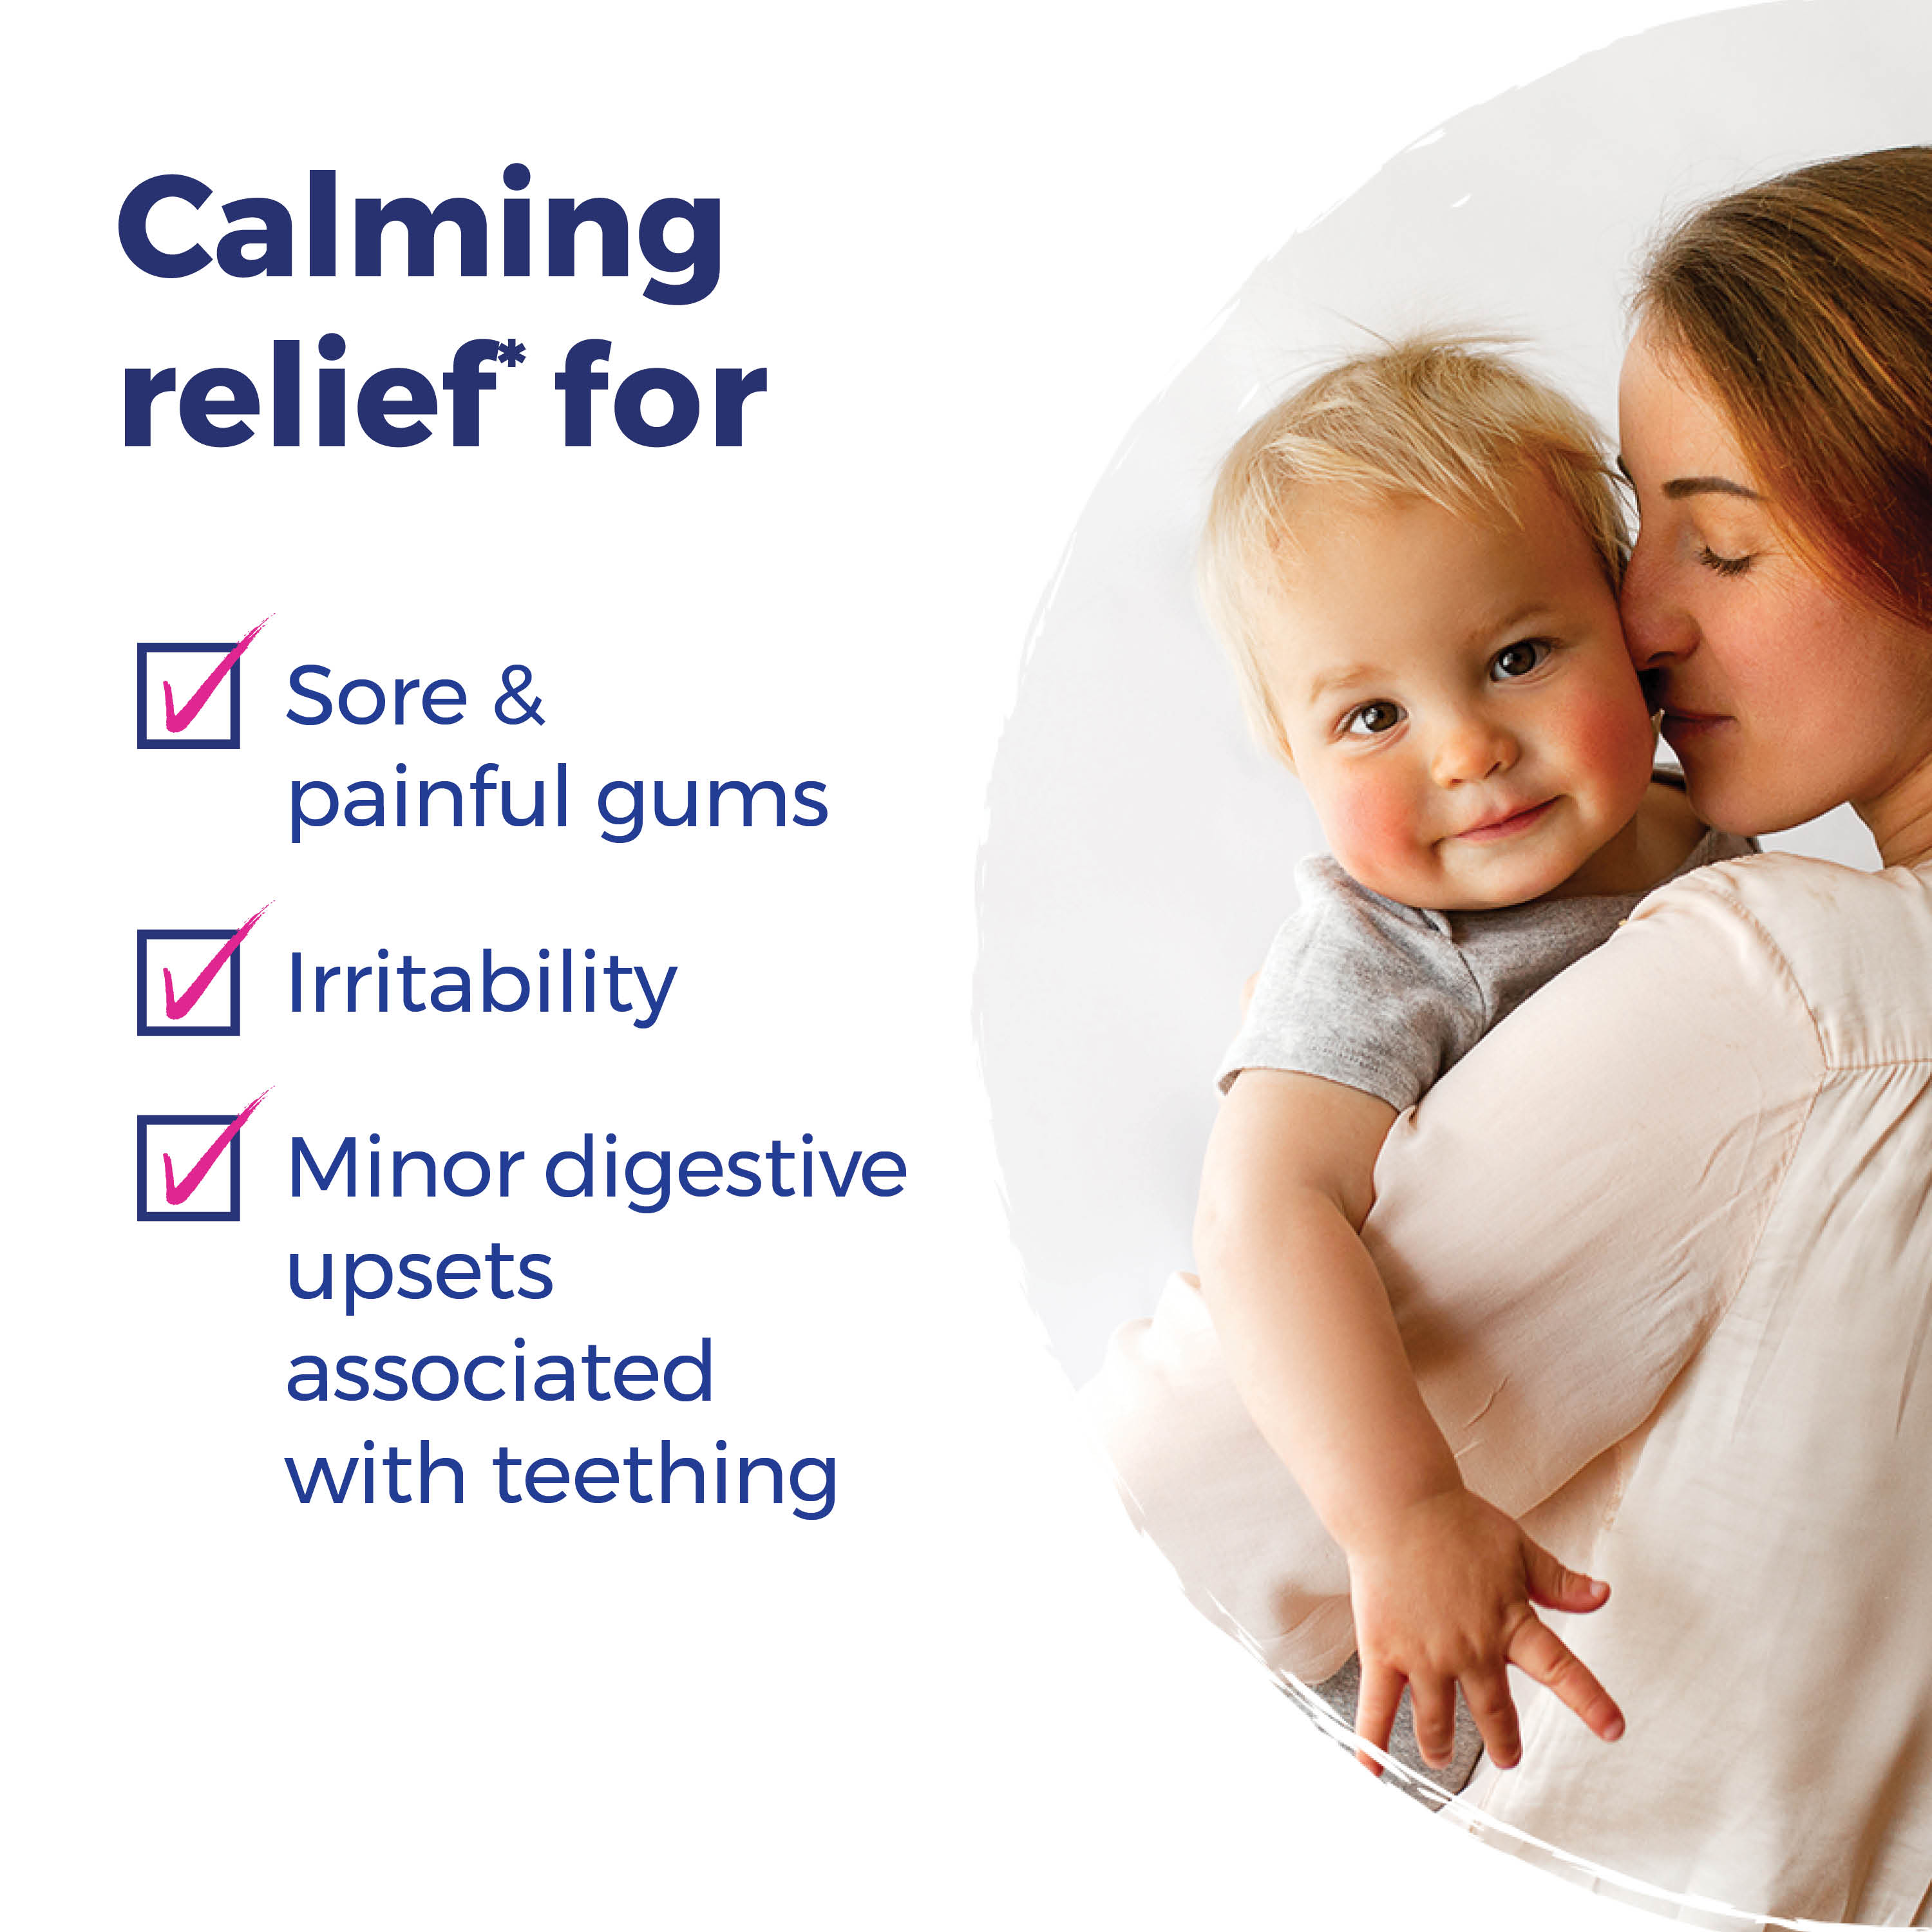 Boiron Camilia, Homeopathic Medicine for Teething Relief, 30 Single Liquid Doses - image 5 of 11